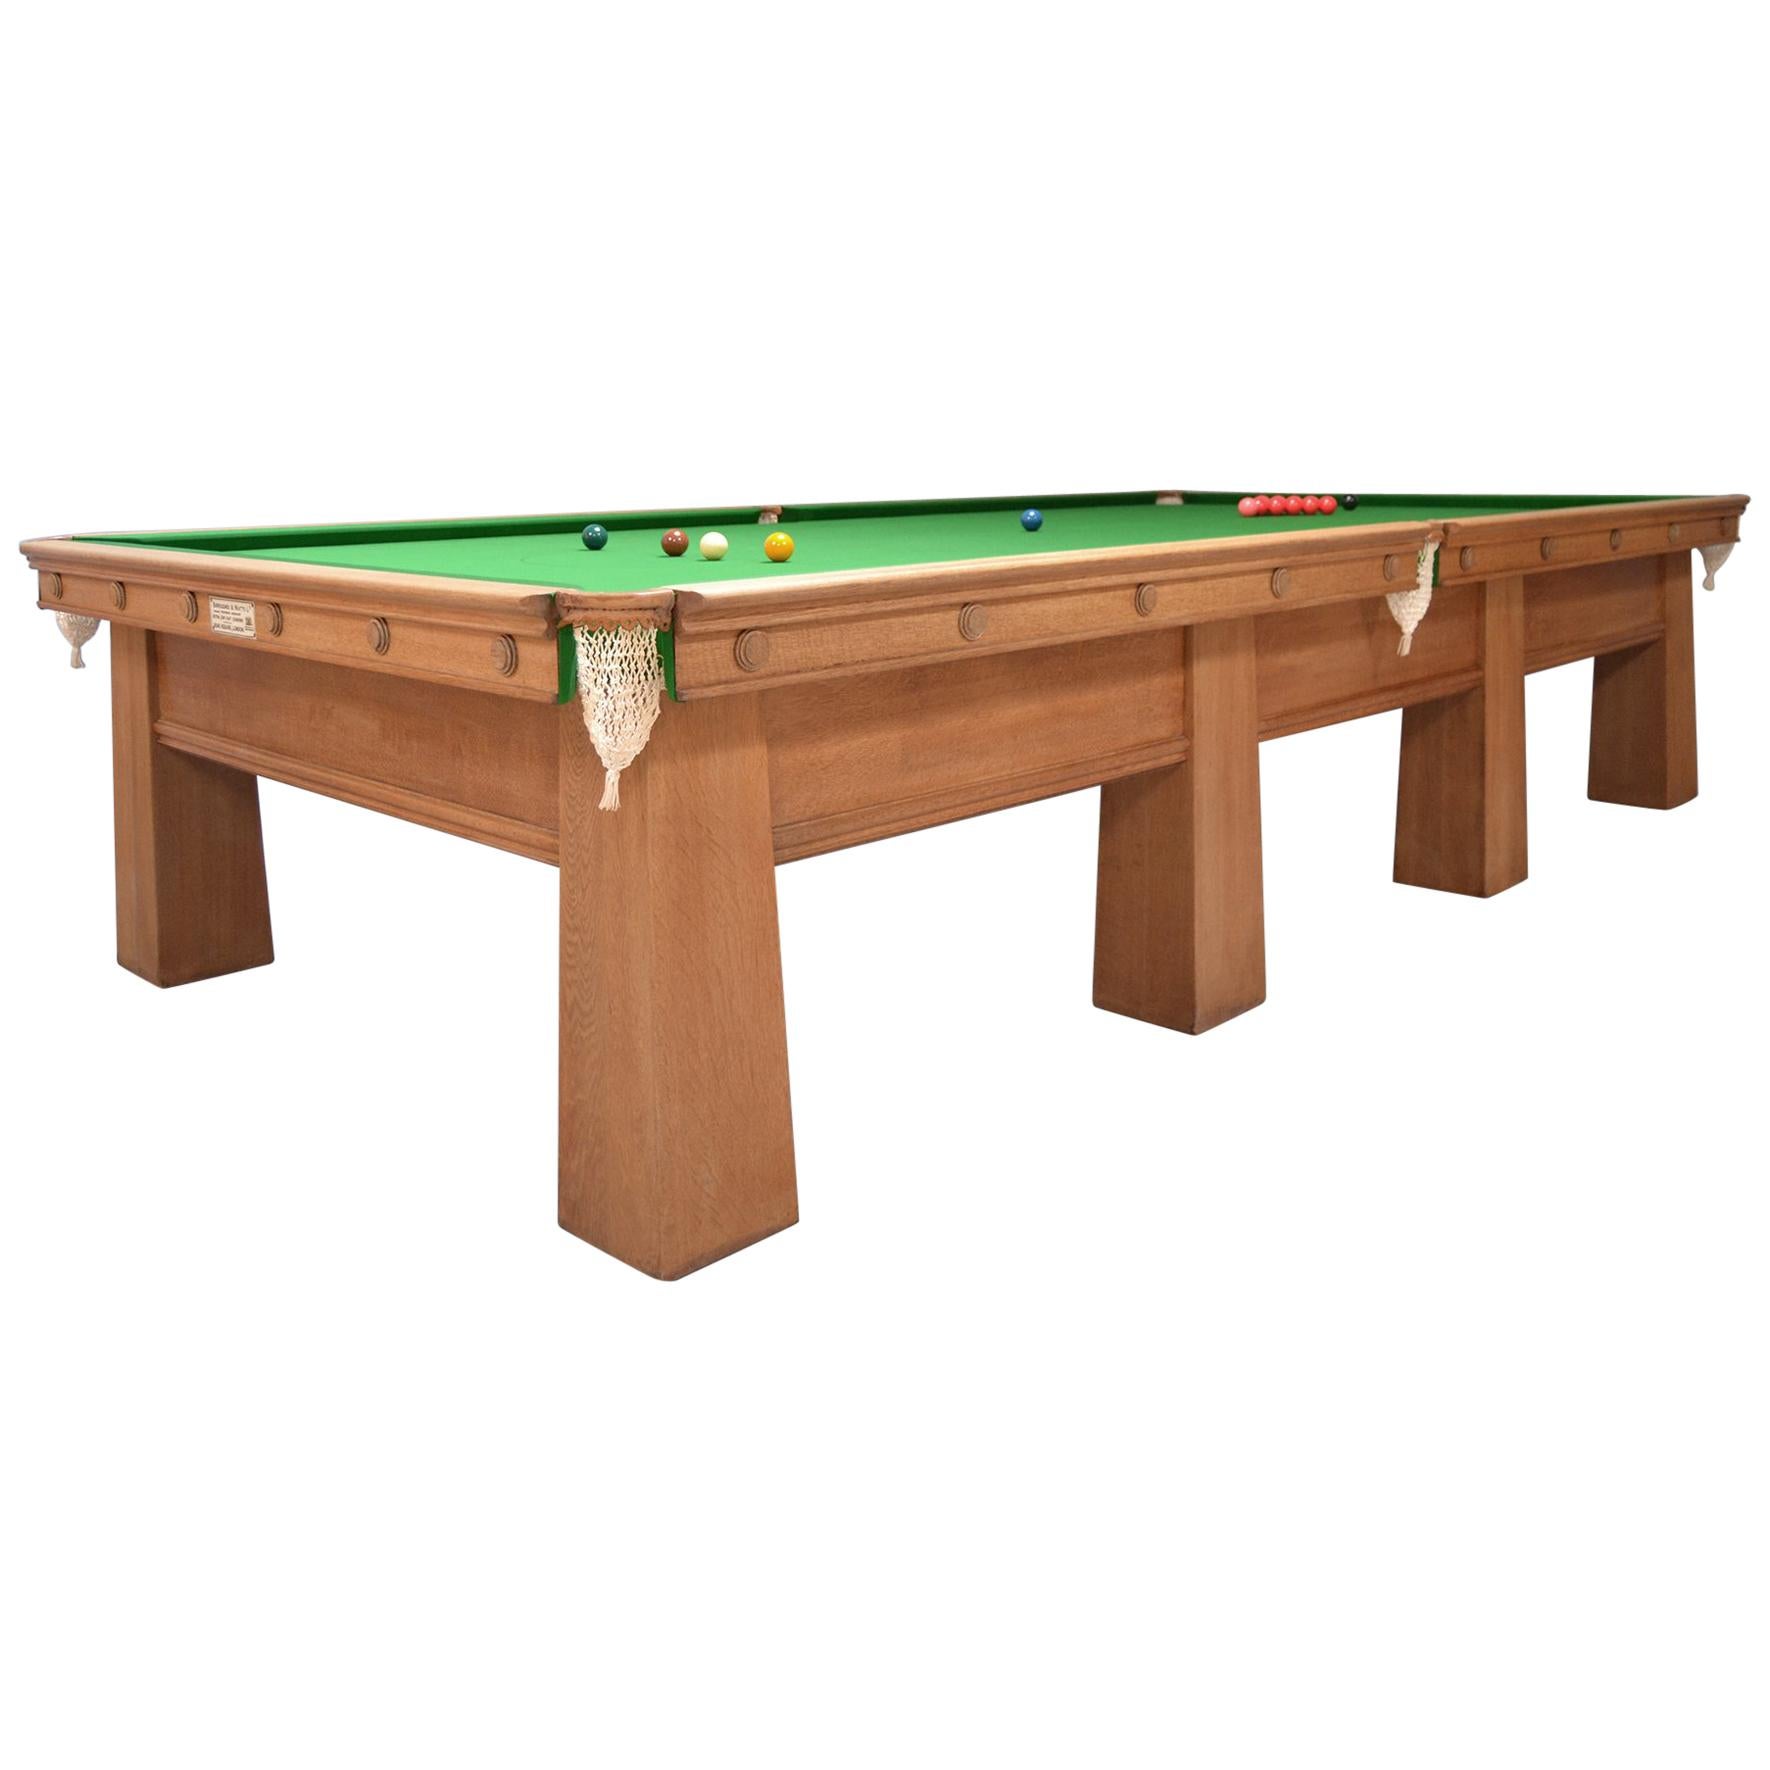 md sports pool table